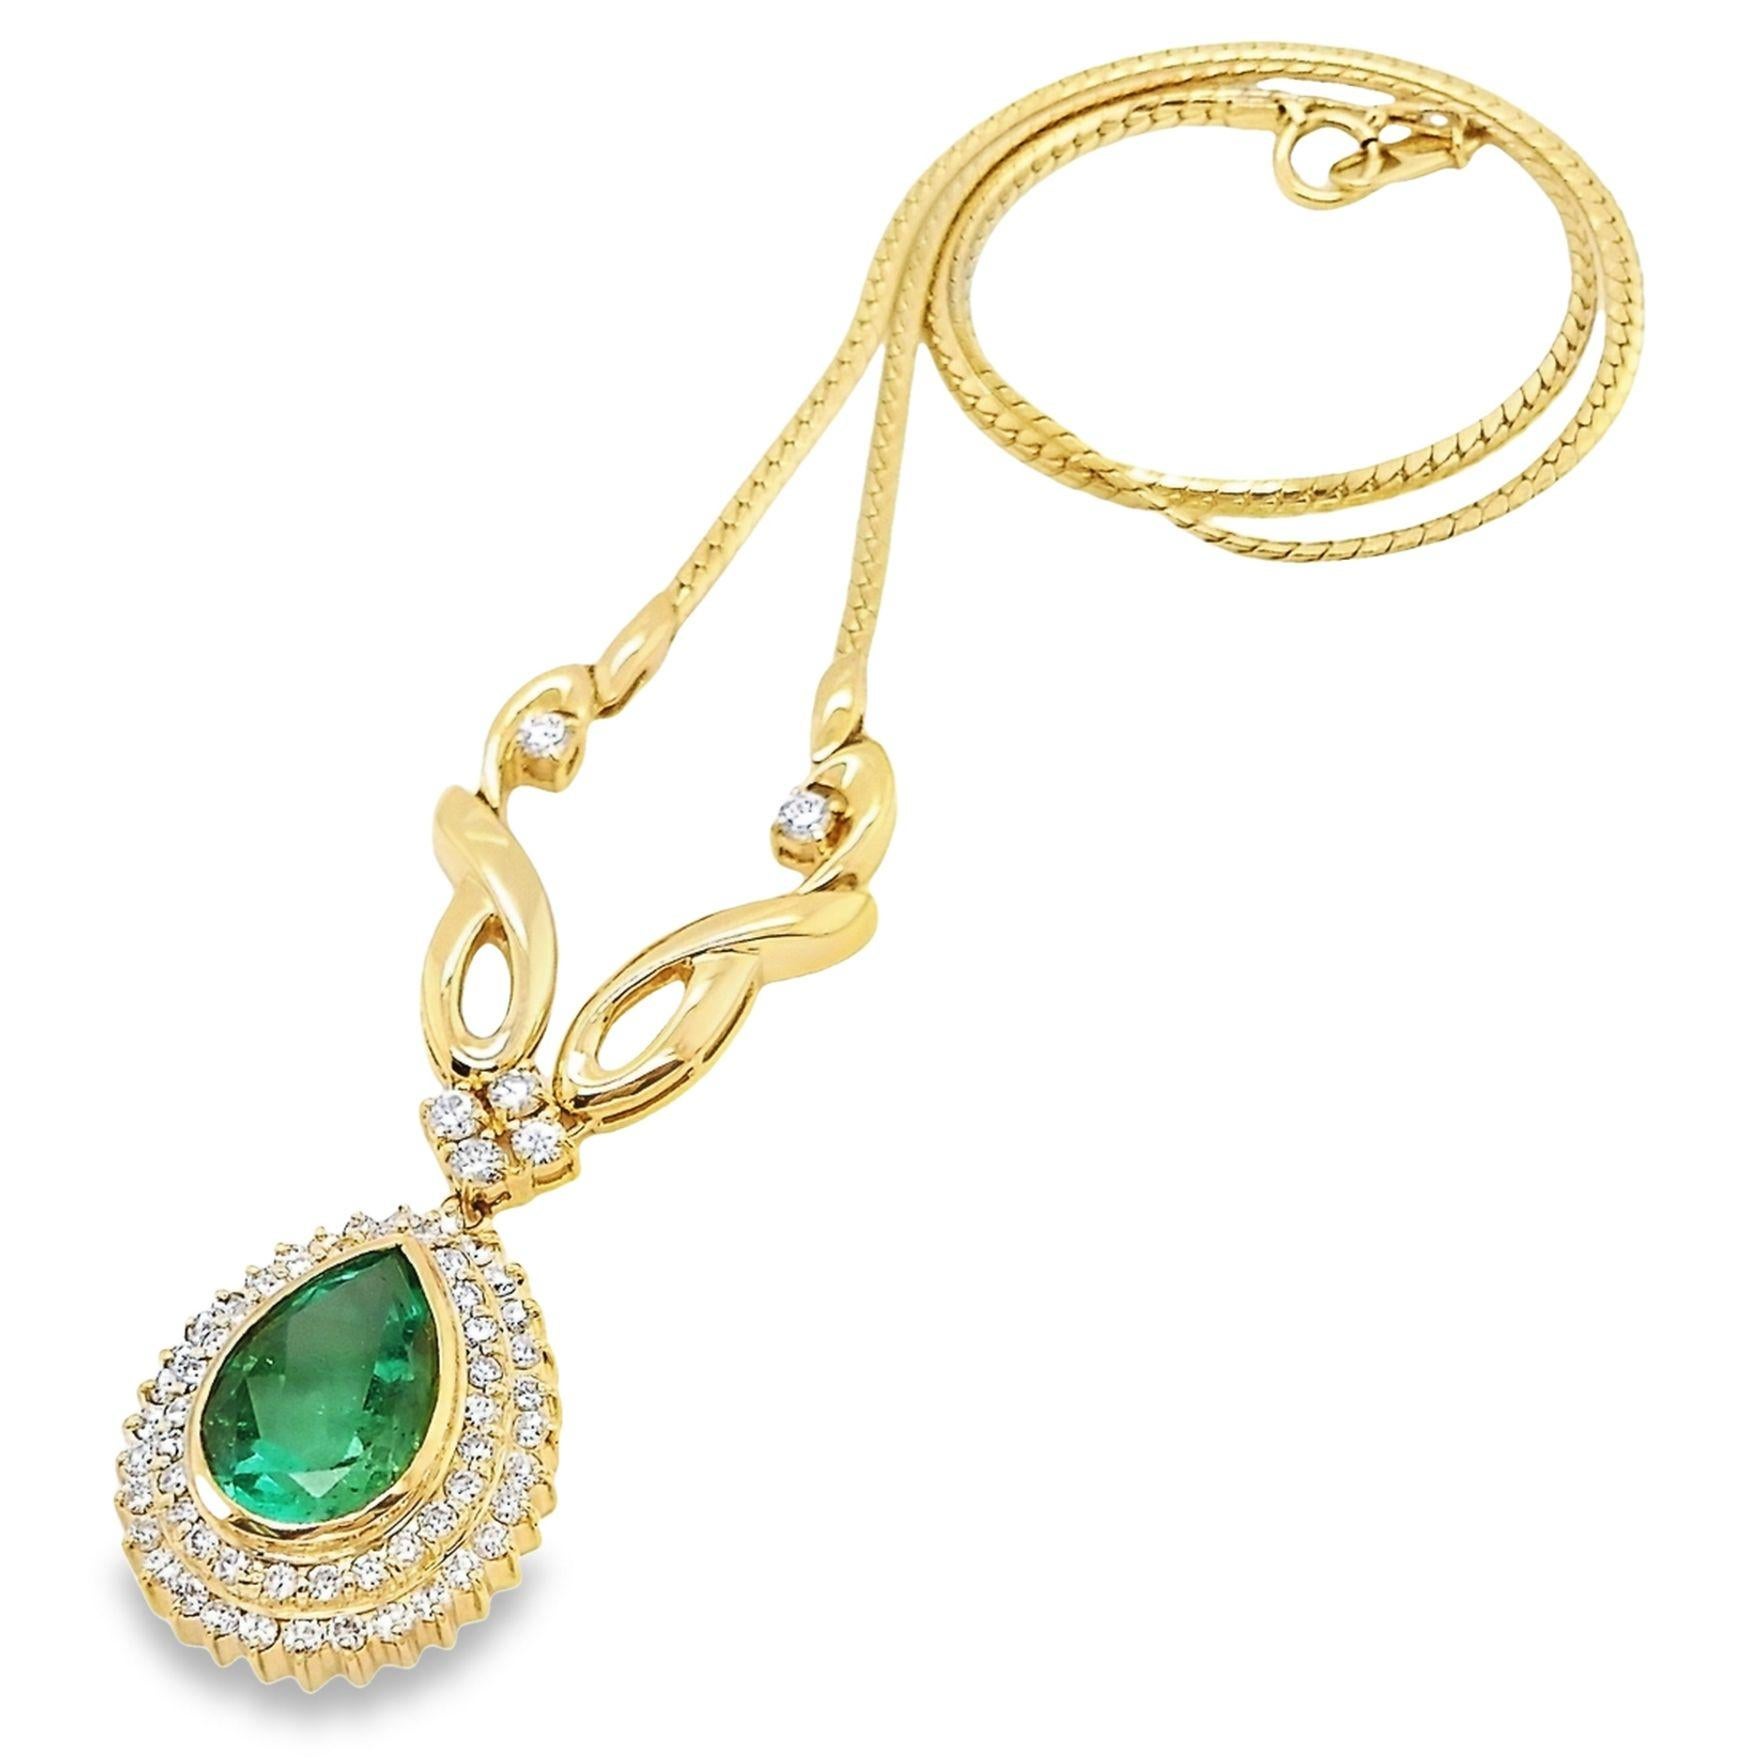 Elevate your style with Top Crown Jewelry's 5.14-carat intense green Colombian emerald necklace. Drenched in luxury, this opulent piece is suspended on an 18K yellow gold chain, adorned with 1.46-carat natural round brilliant-cut diamonds, creating